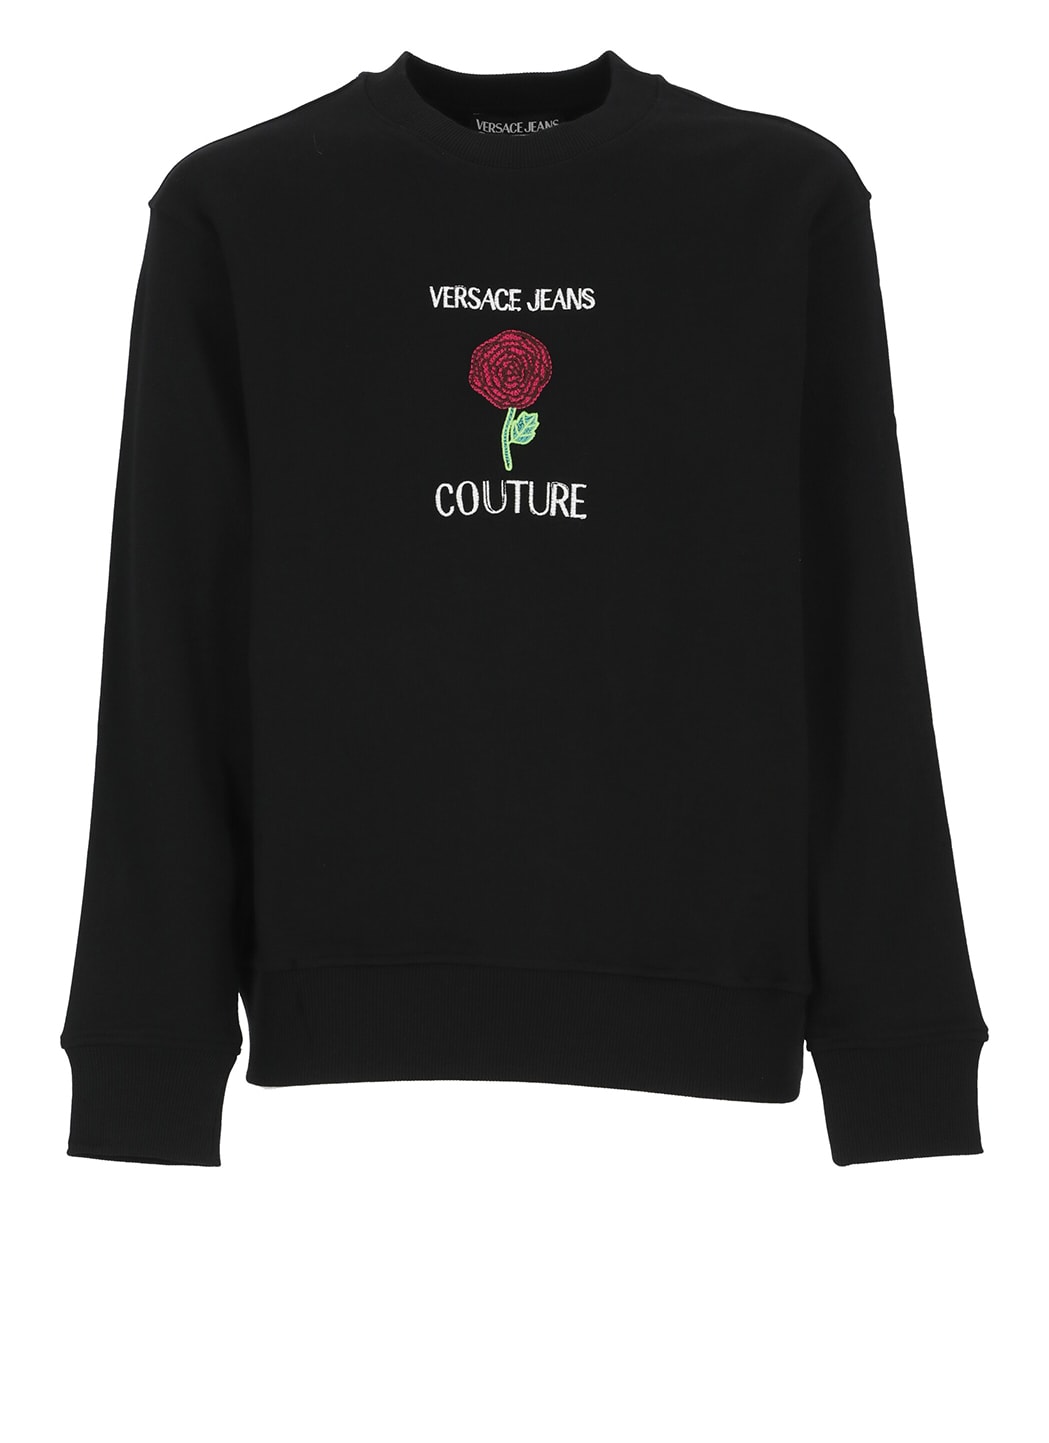 VERSACE JEANS COUTURE ROSES SWEATSHIRT